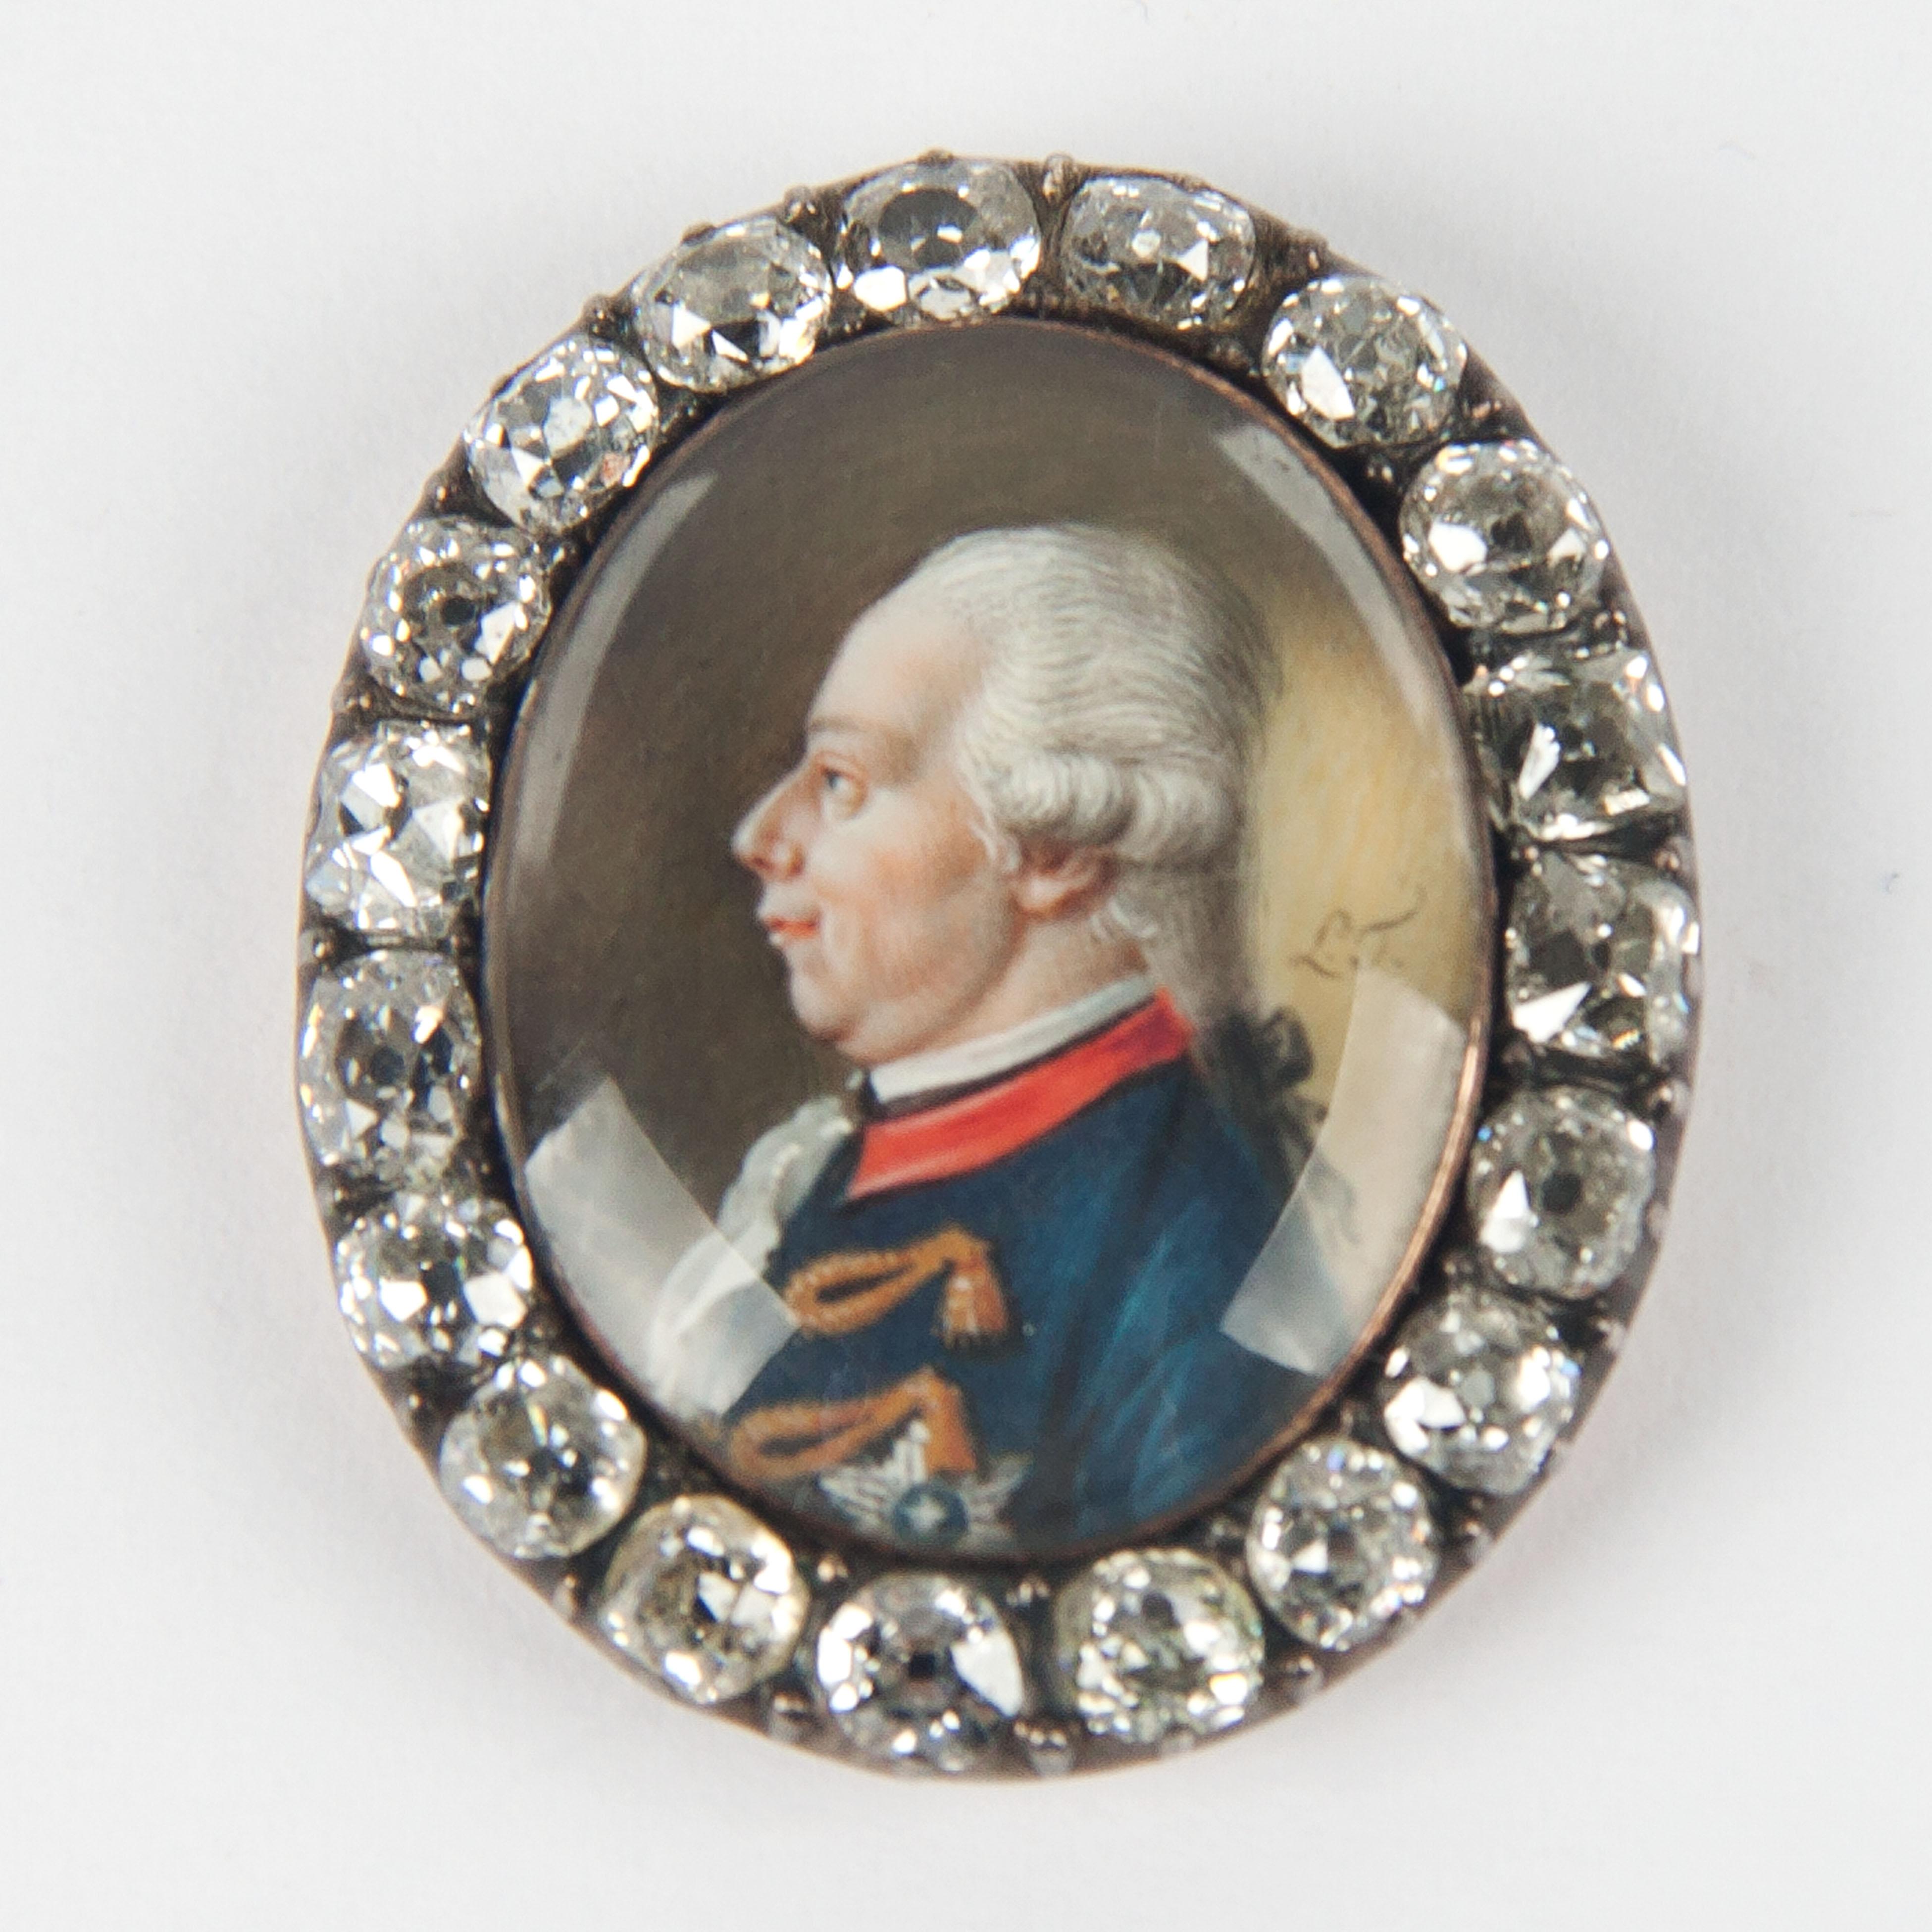 18th century painted golden jewel with diamonds depicting William V.
Signed by  Leonardus Temminck (1753-1813)
